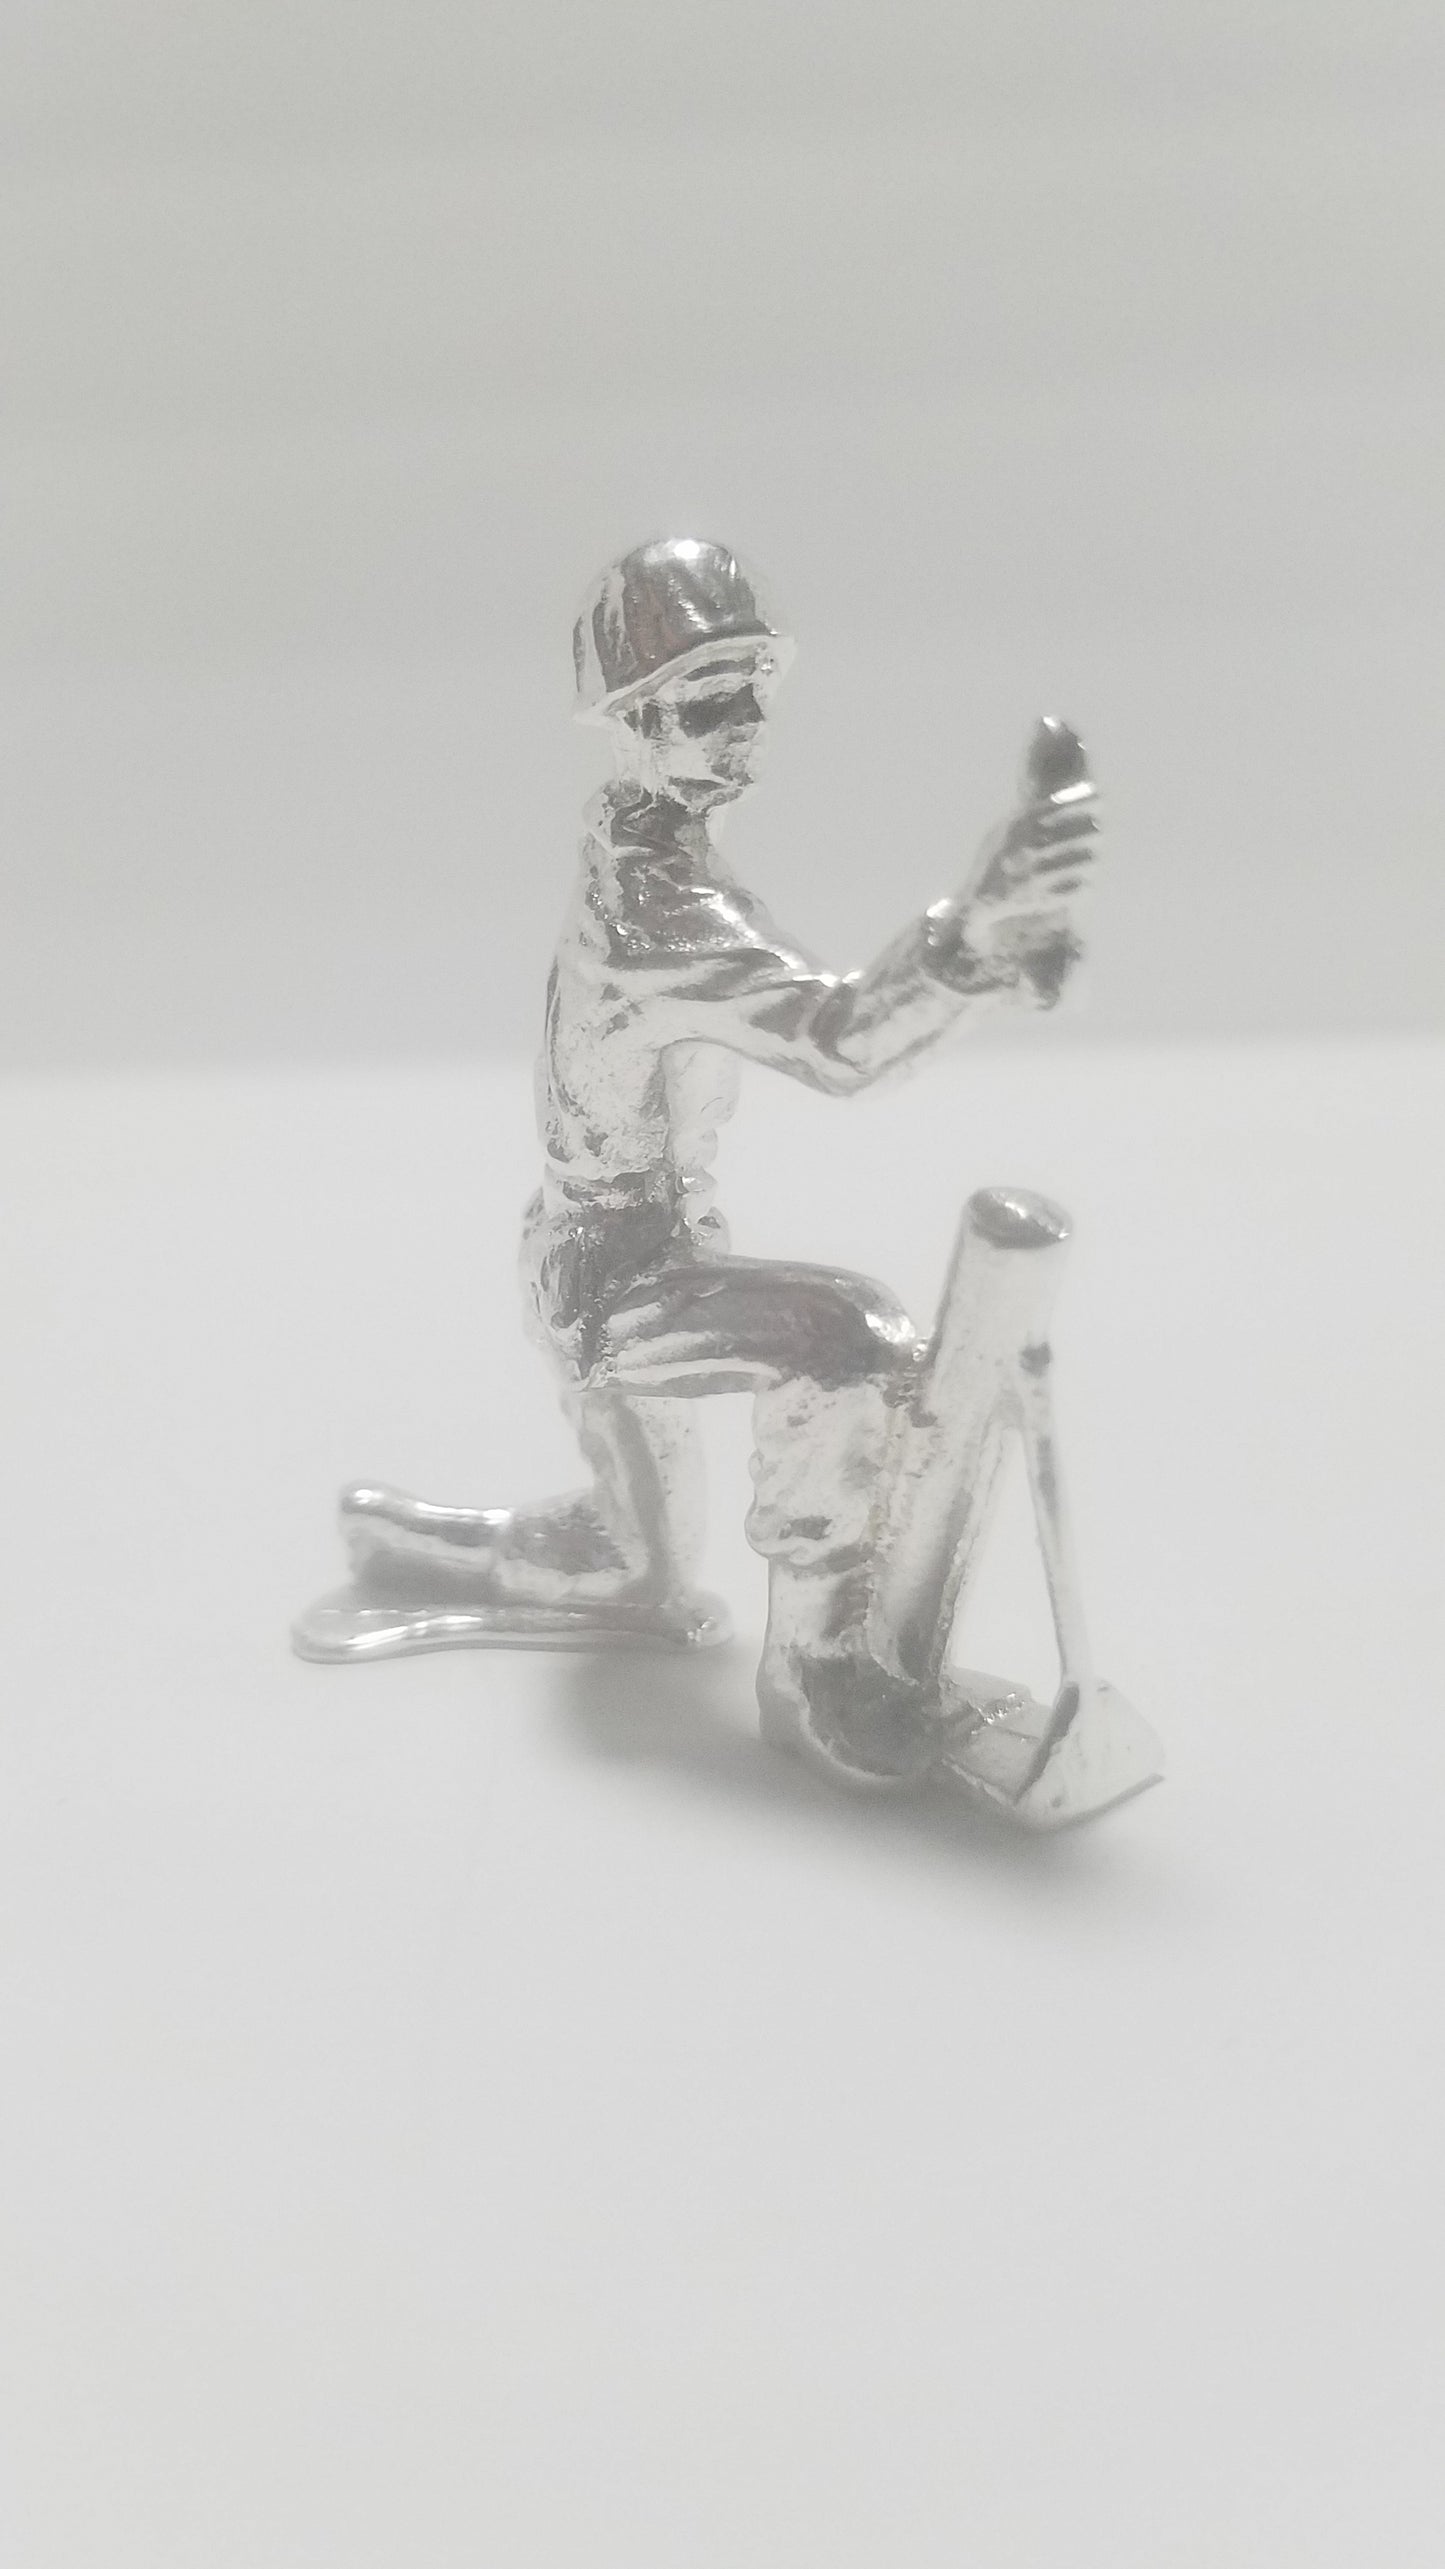 Classic Army Man Mortar Soldier 1.25 oz 999 Silver Hand Poured Bullion